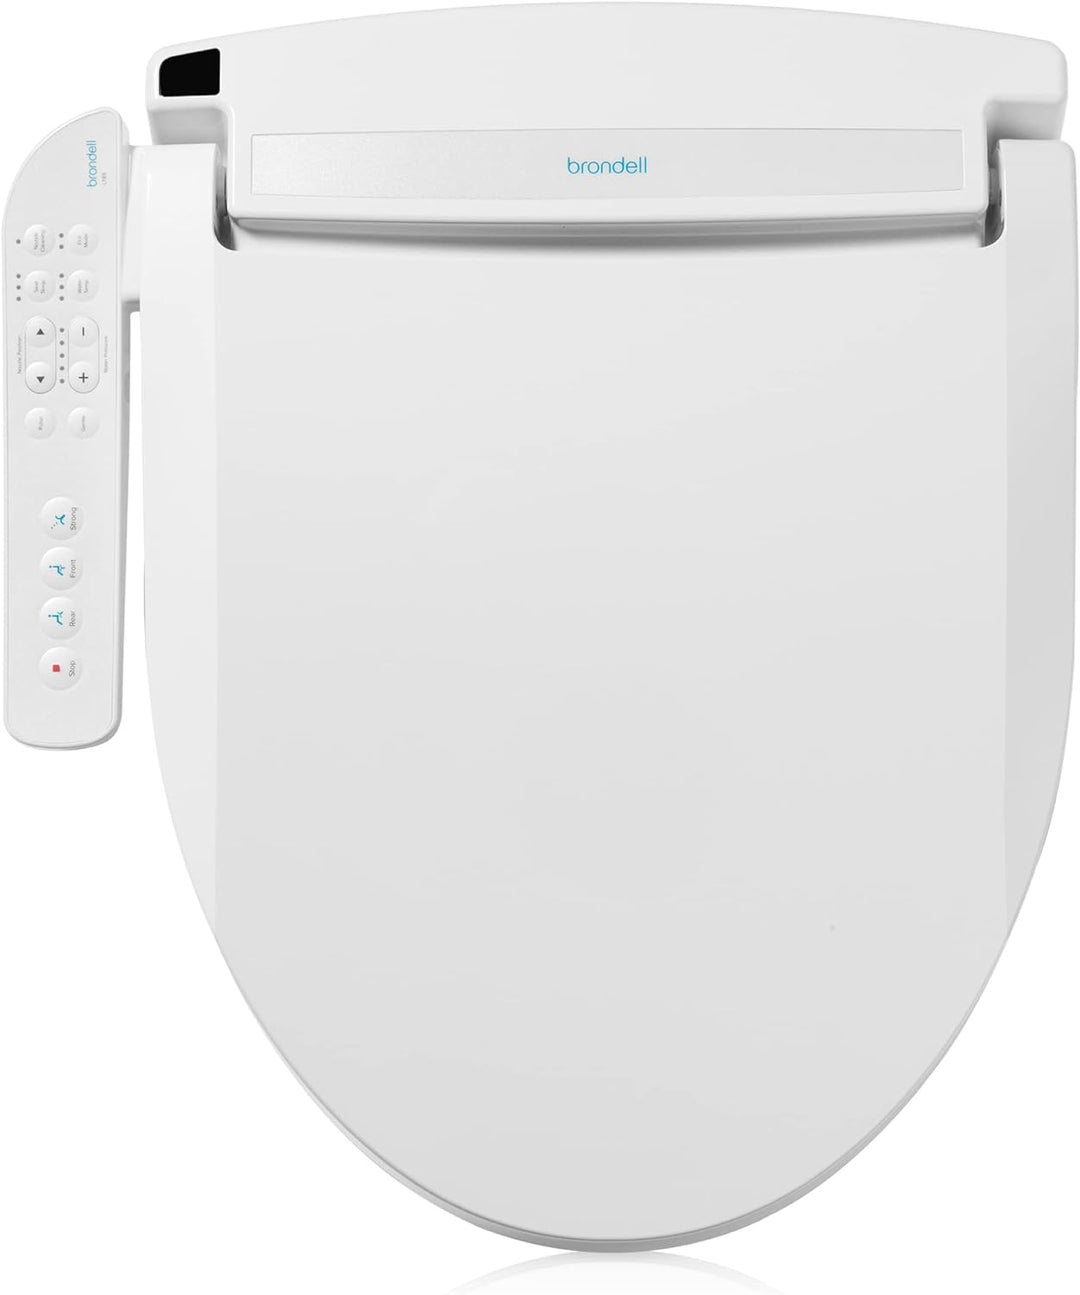 Swash Electronic Bidet Toilet Seat LT89, Fits Elongated Toilets, White – Side Arm Control, Warm Water Wash, Strong Wash Mode, Stainless-Steel Nozzle, Nightlight and Easy Installation